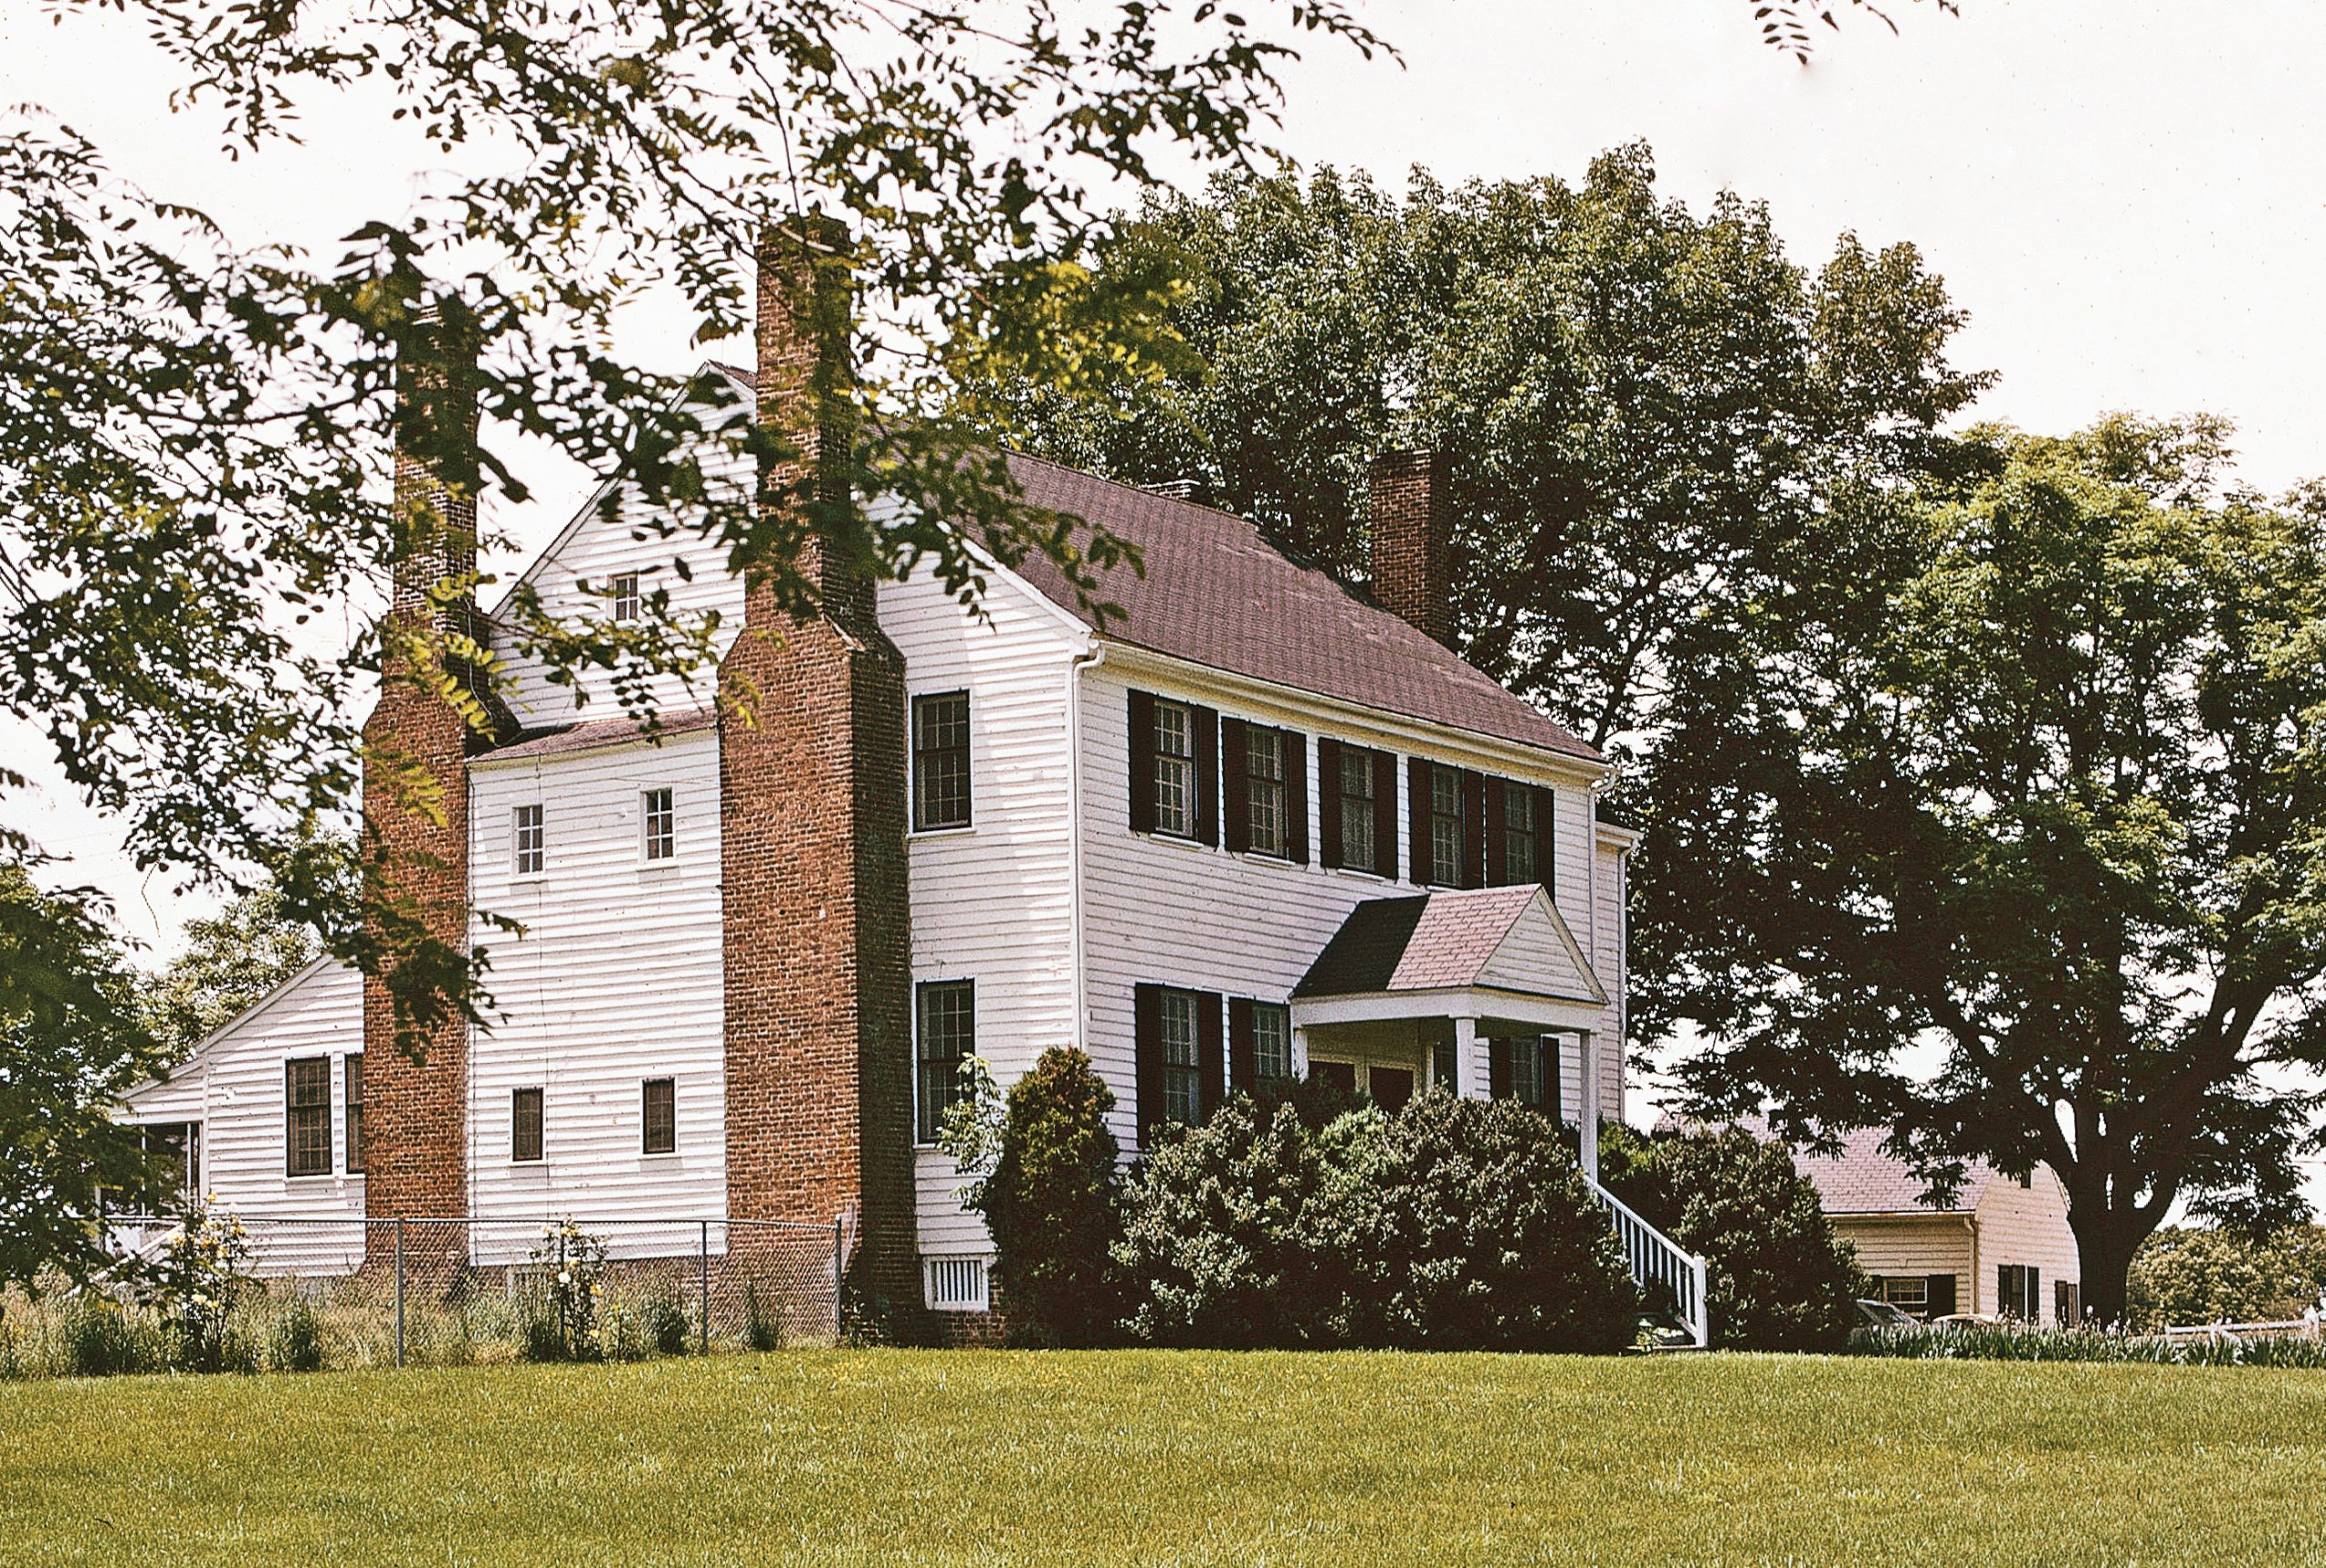 054-0057_Green_Springs_House_1972_ext_side_view_VLR_Online-scaled